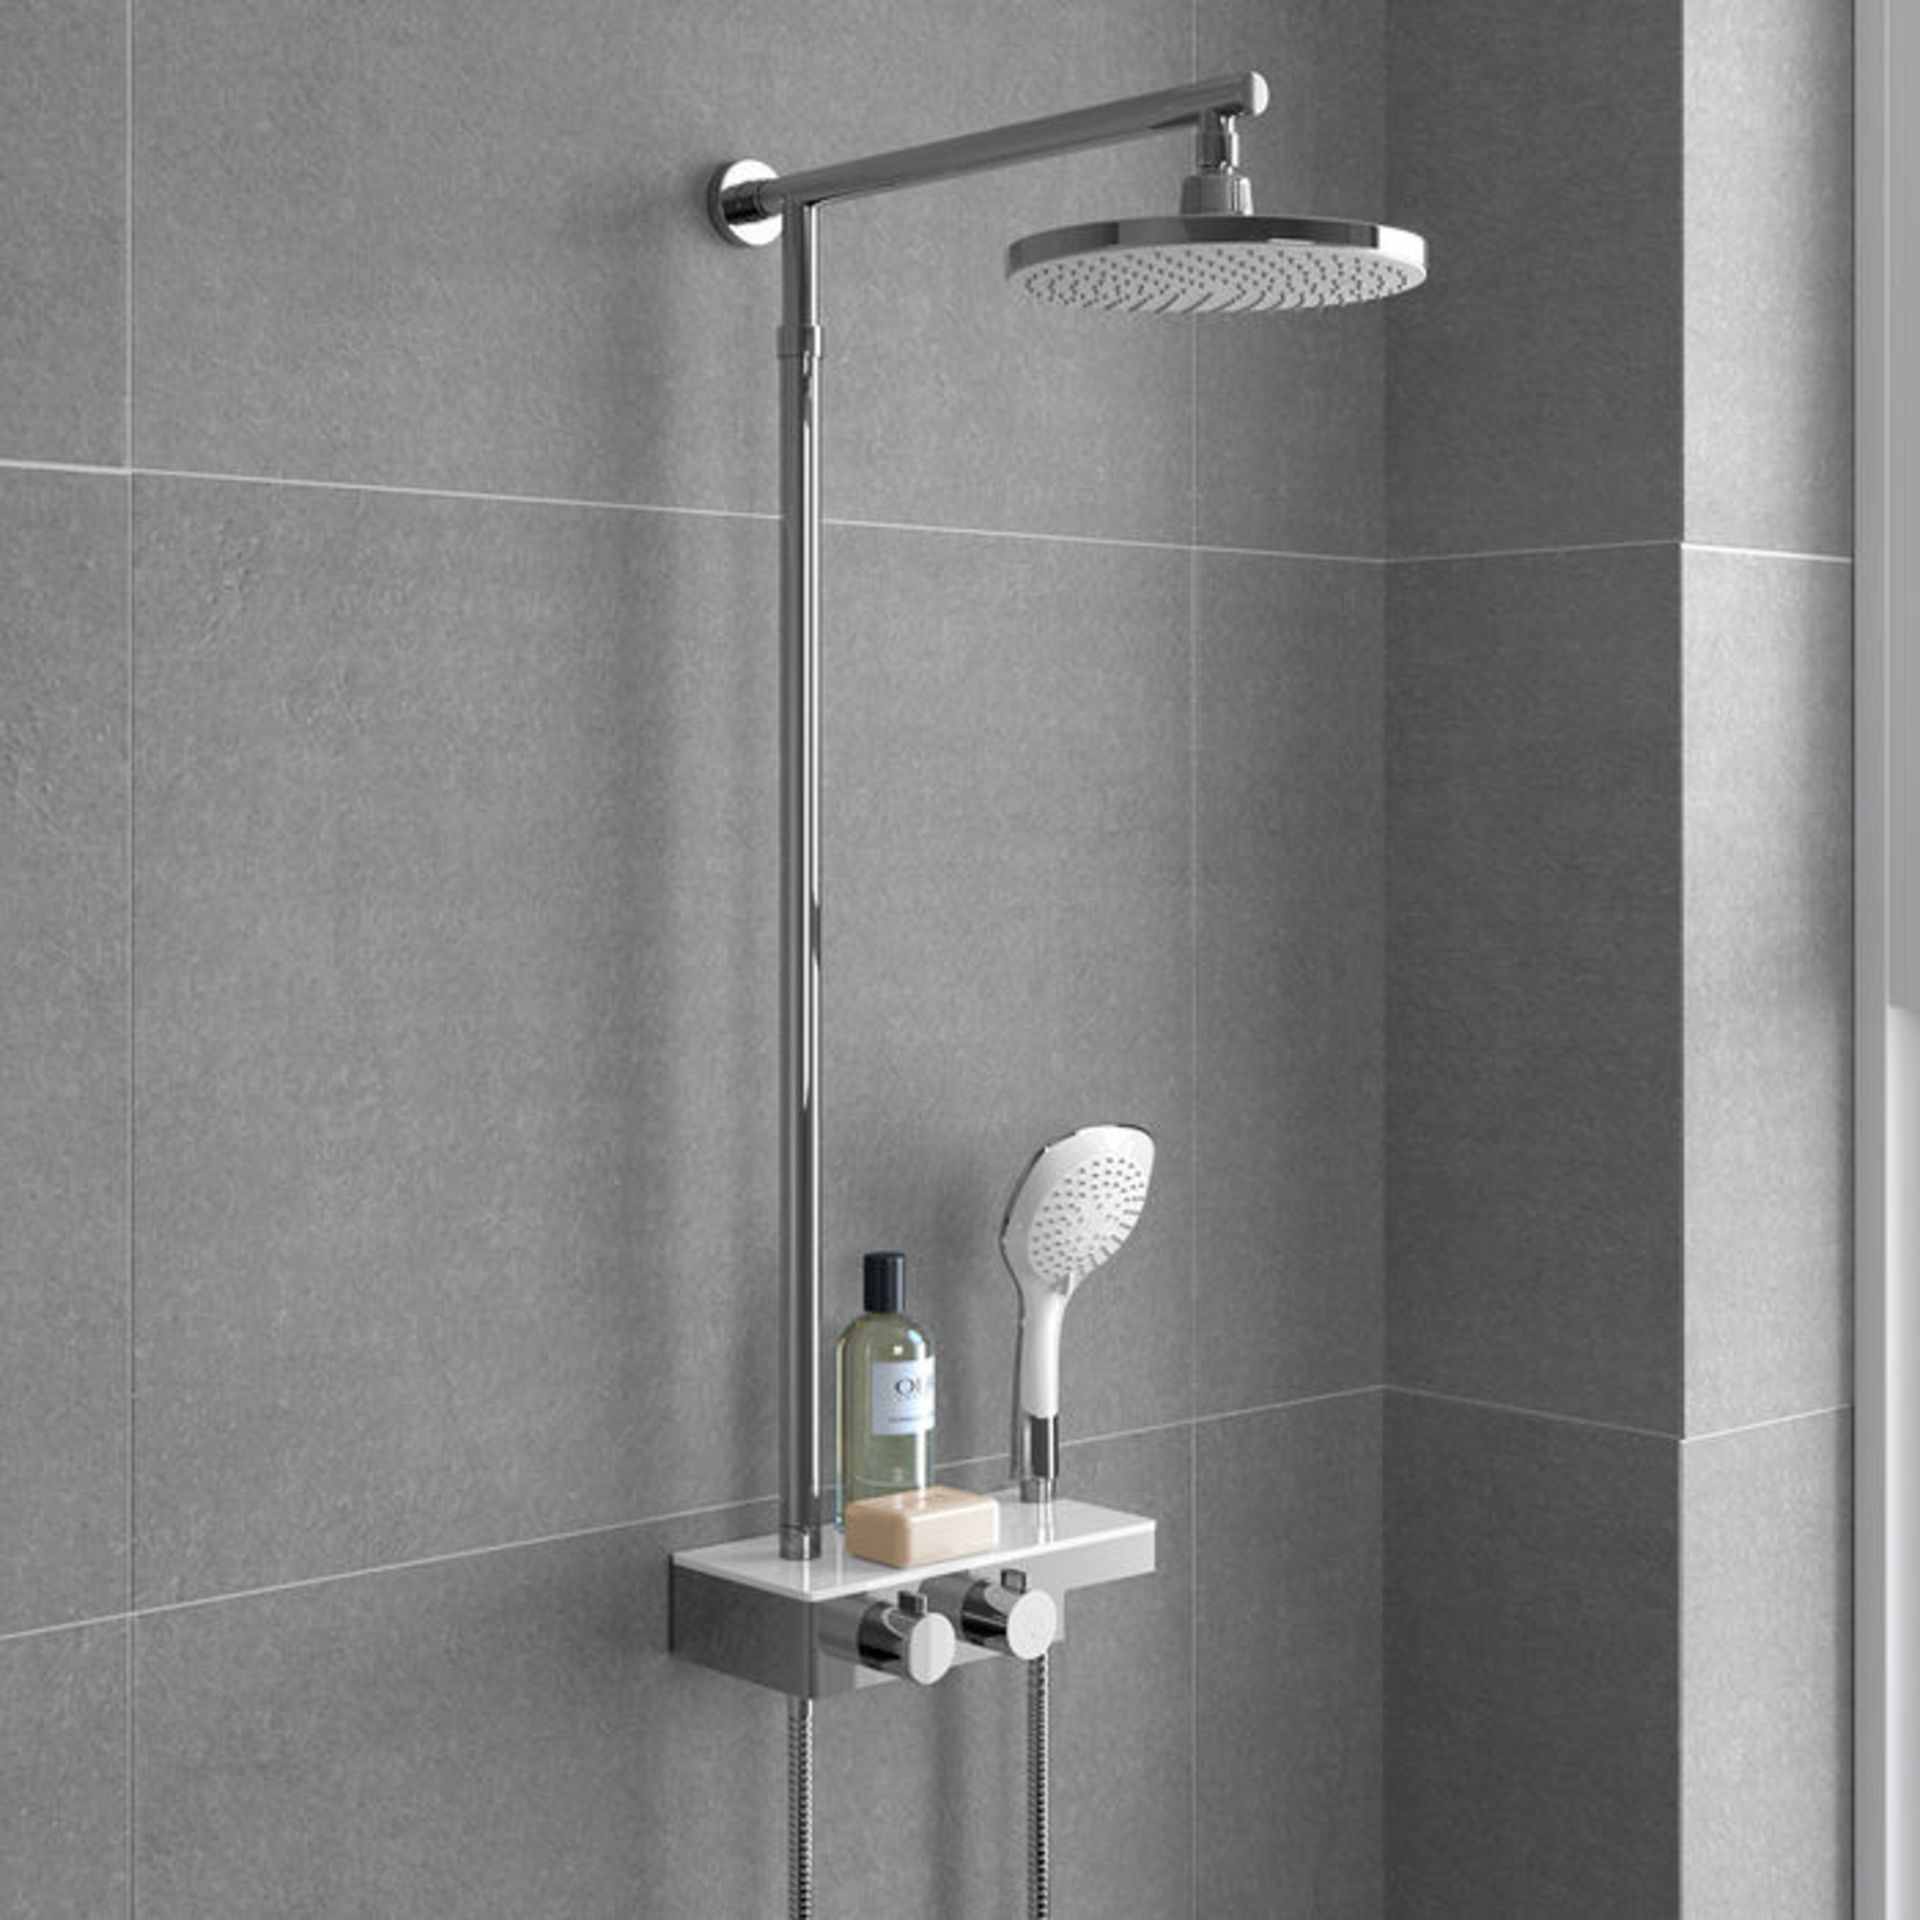 (LL70) Round Exposed Thermostatic Mixer Shower Kit Medium Head & Shelf. Cool to touch shower for - Image 3 of 5